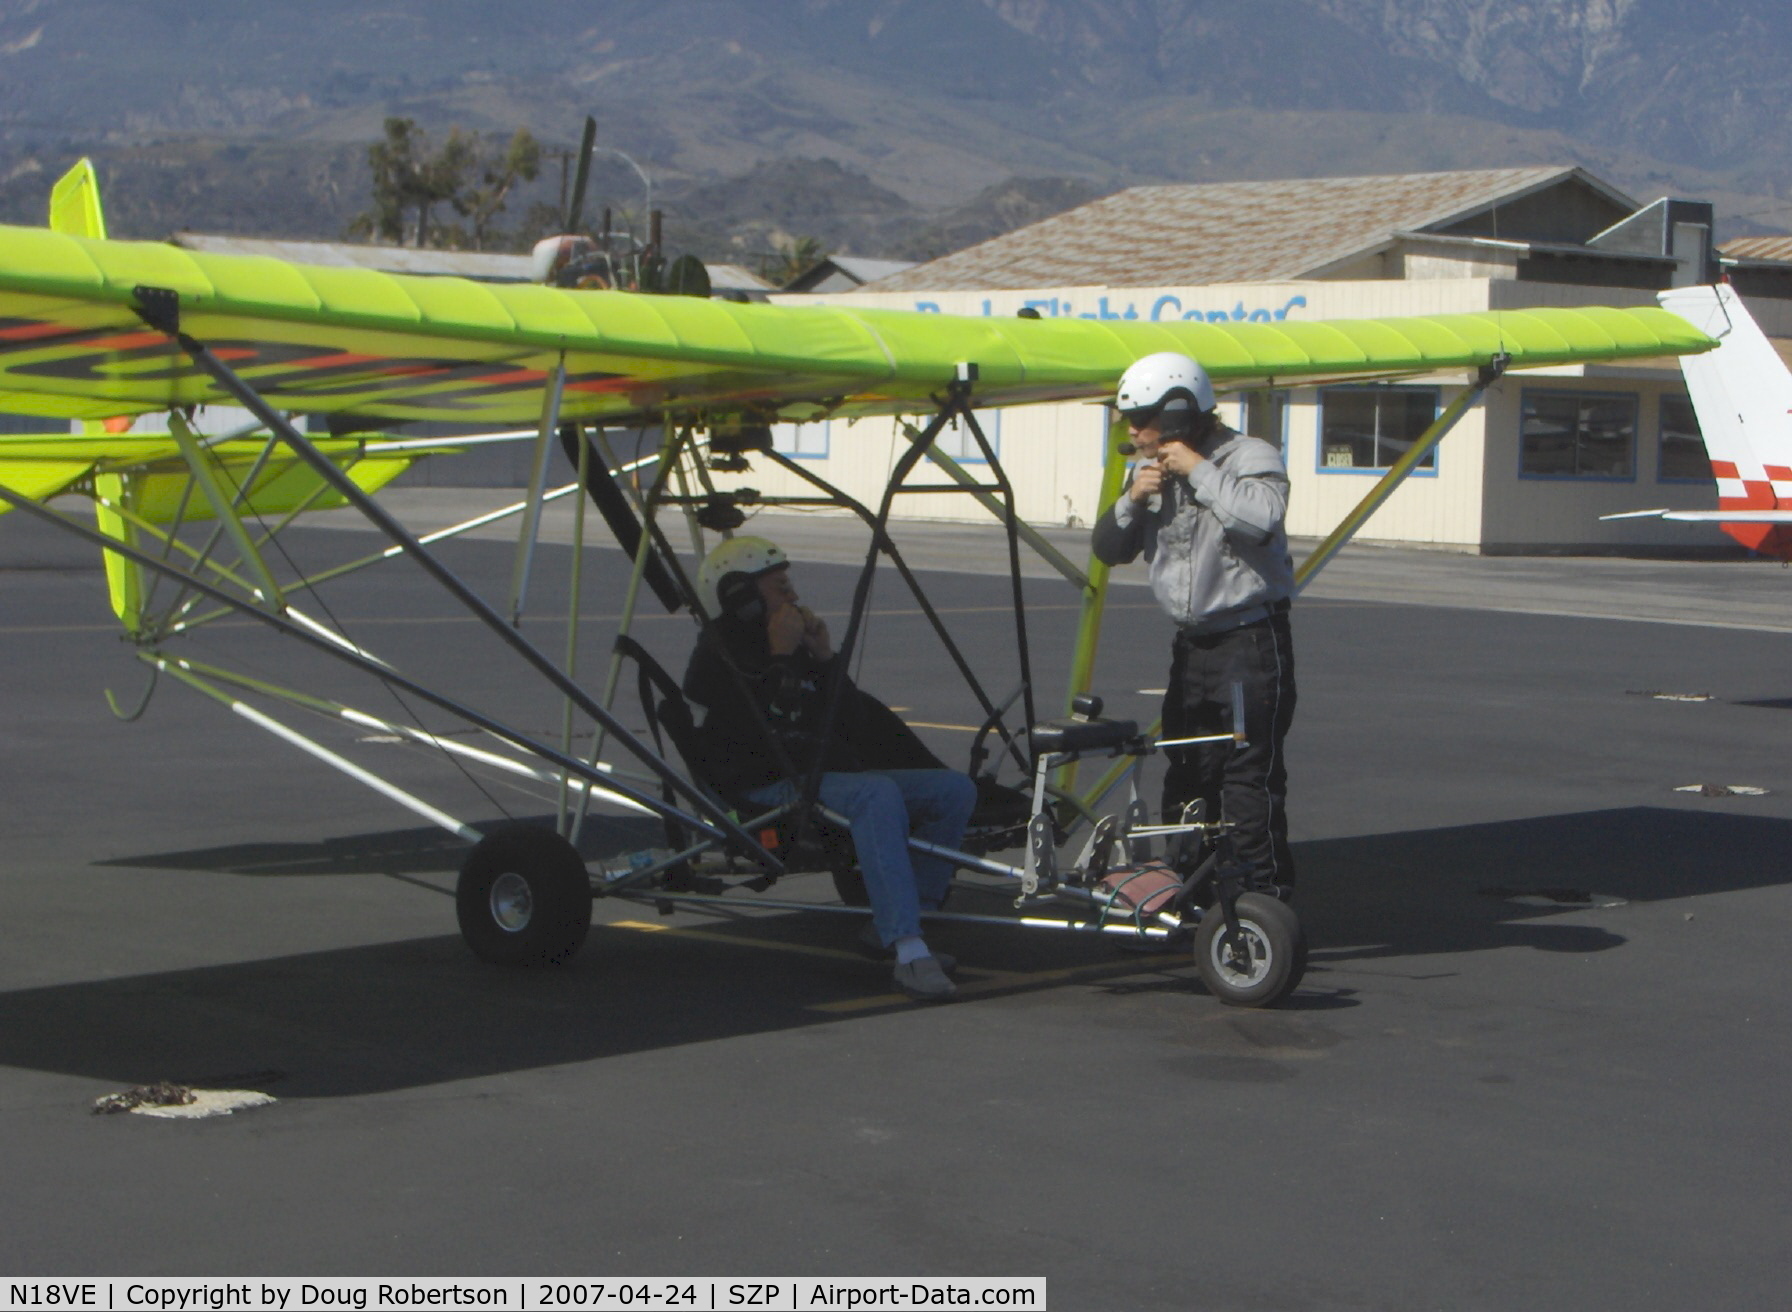 N18VE, 2003 M-Squared Breese 2 C/N 000550, M-Squared BREESE 2 Ultralight, Rotax 503 2 cylinder two-stroke 52 Hp, preflight-donning helmets